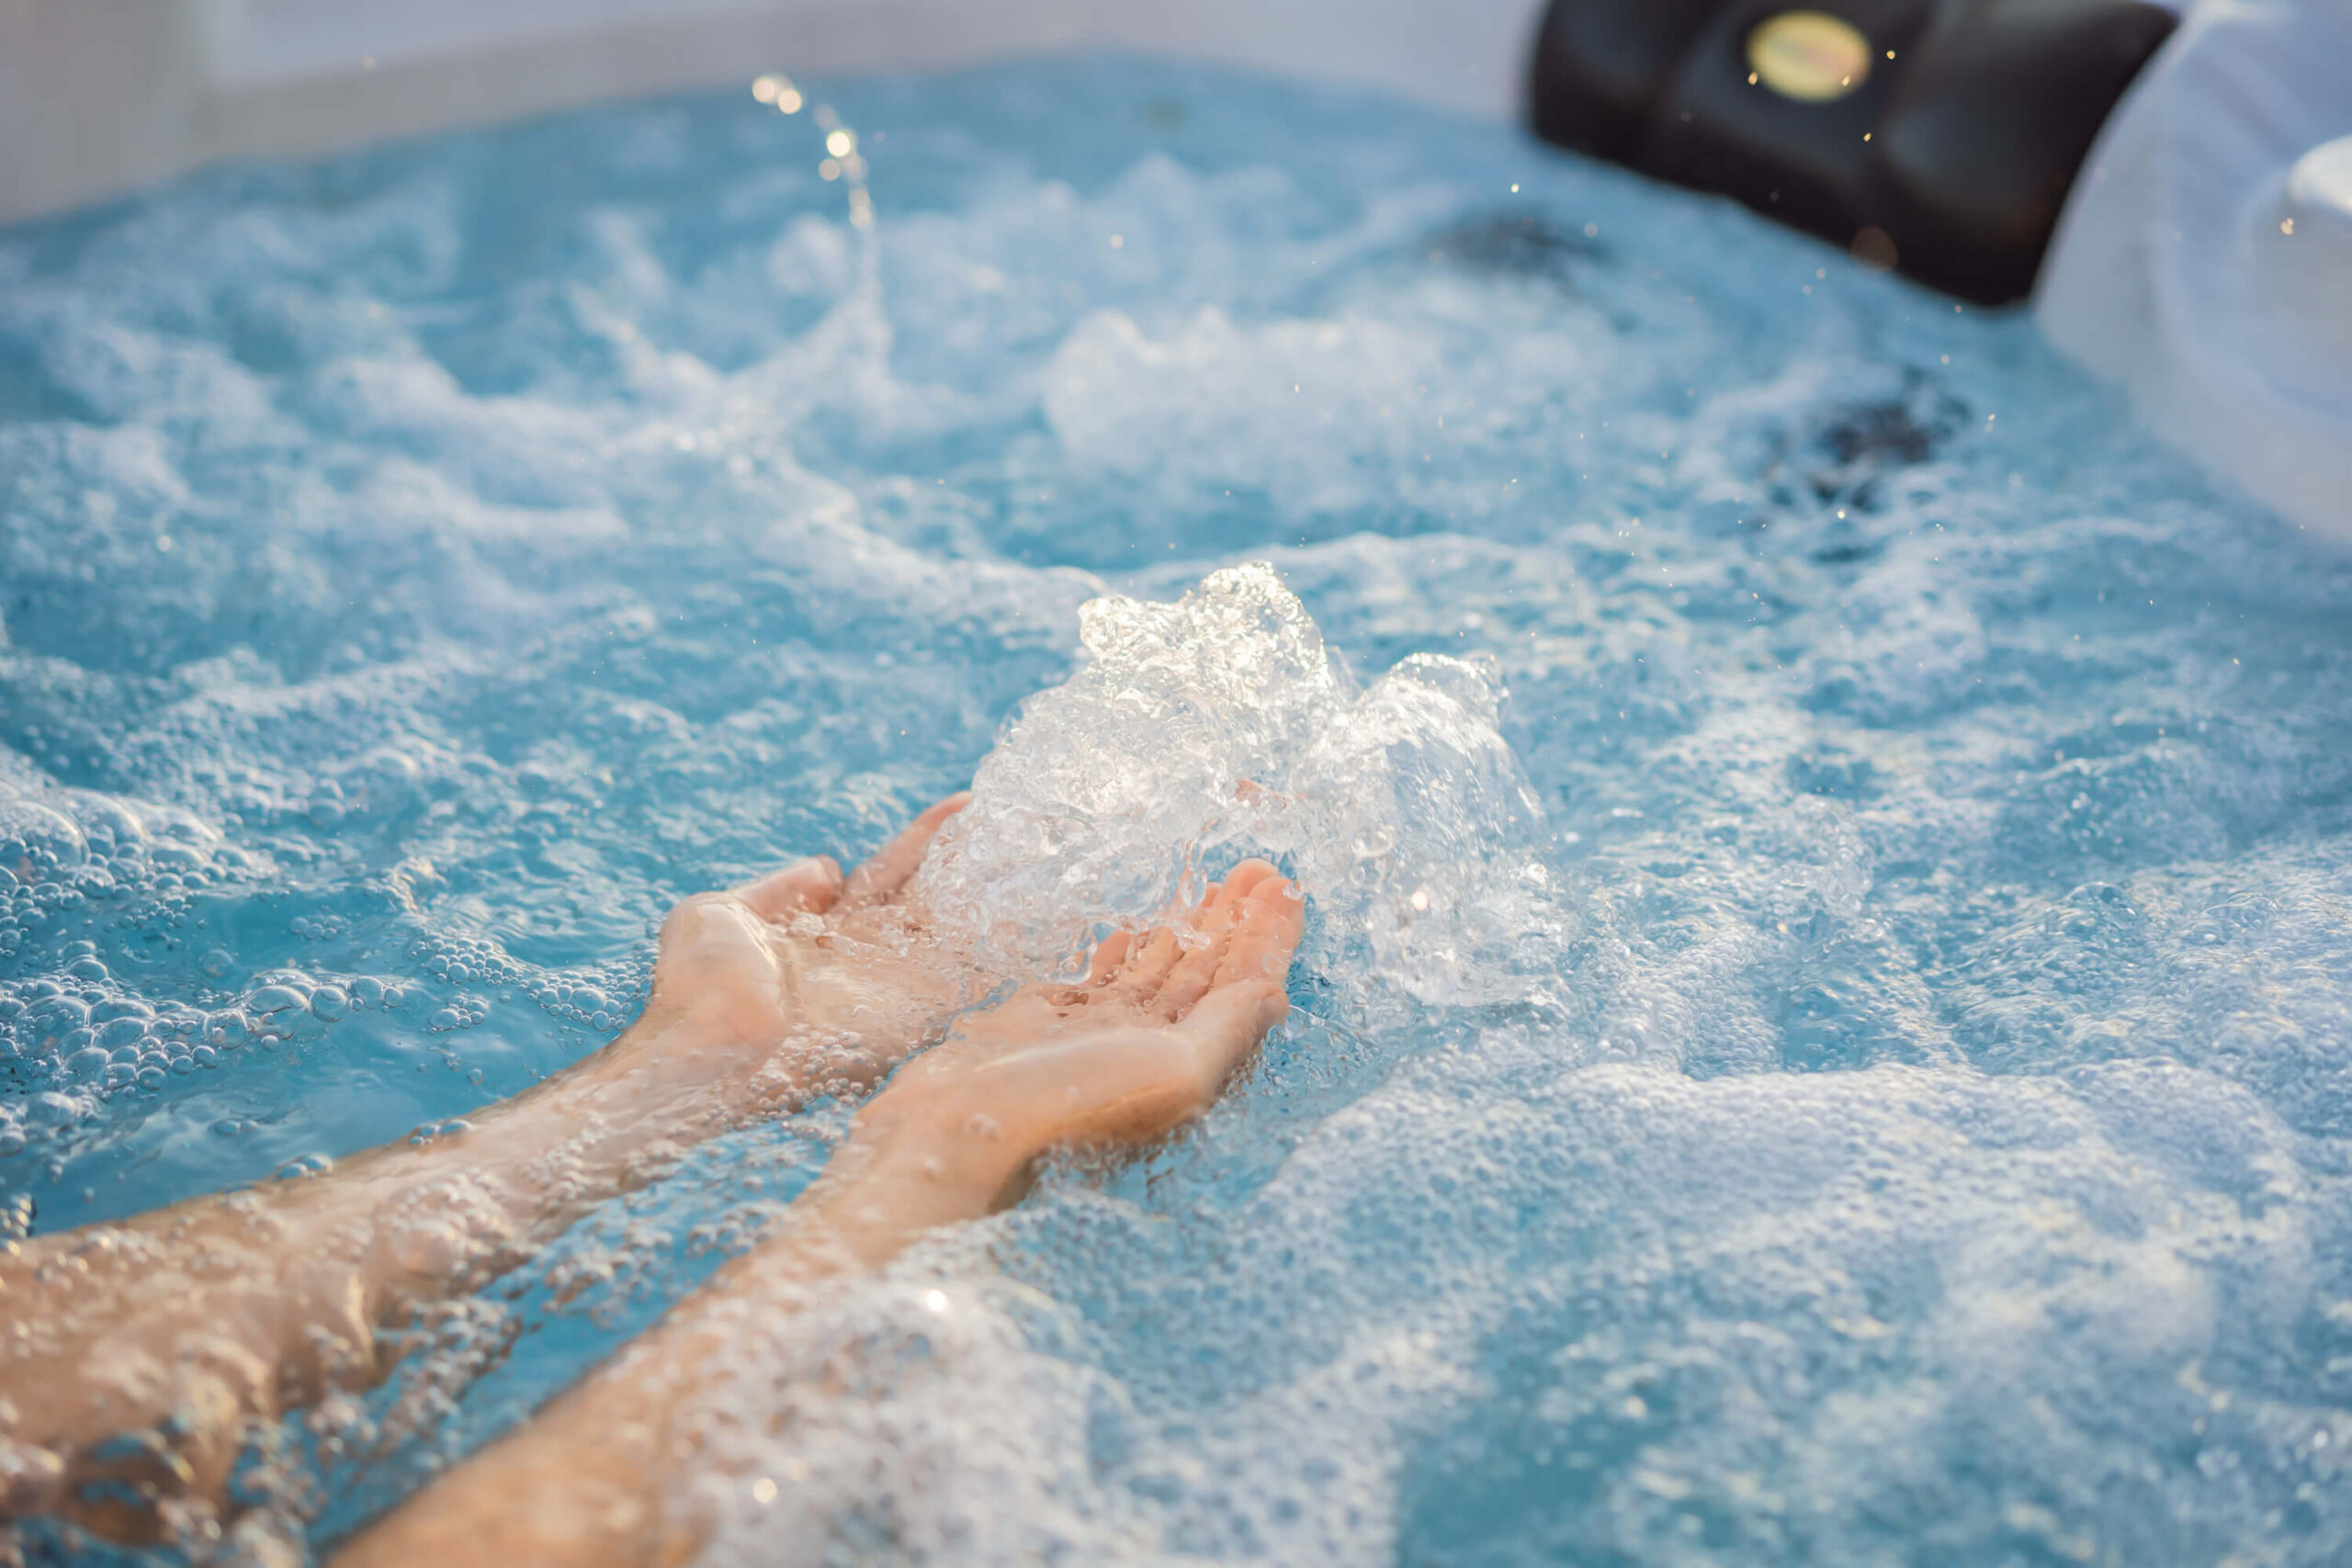 Your Health & Wellness is the Easiest Resolution to Keep With a Hot Tub